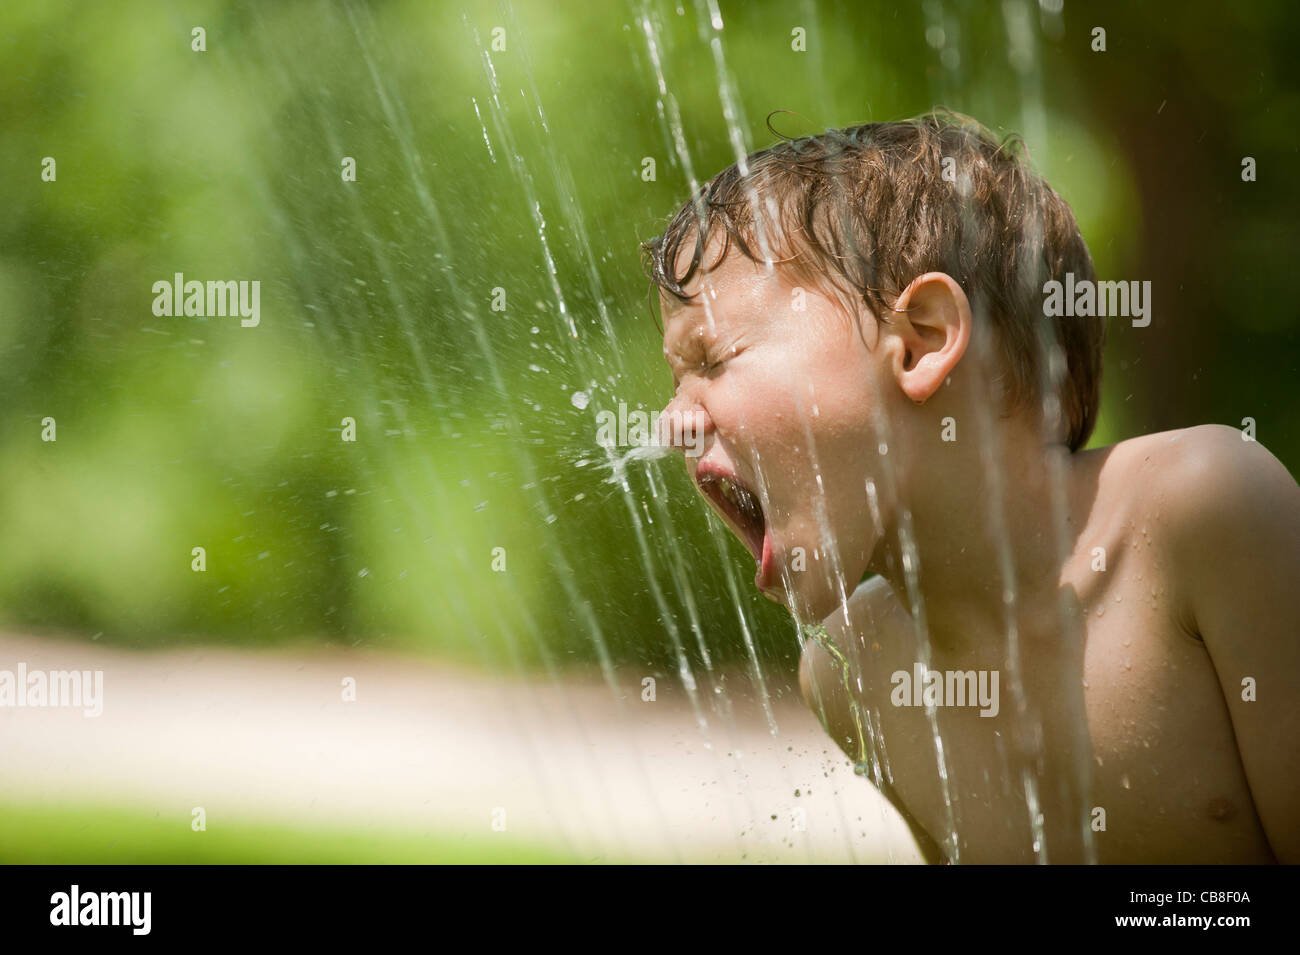 A boy tries to take a drink from a water sprinkler. Stock Photo